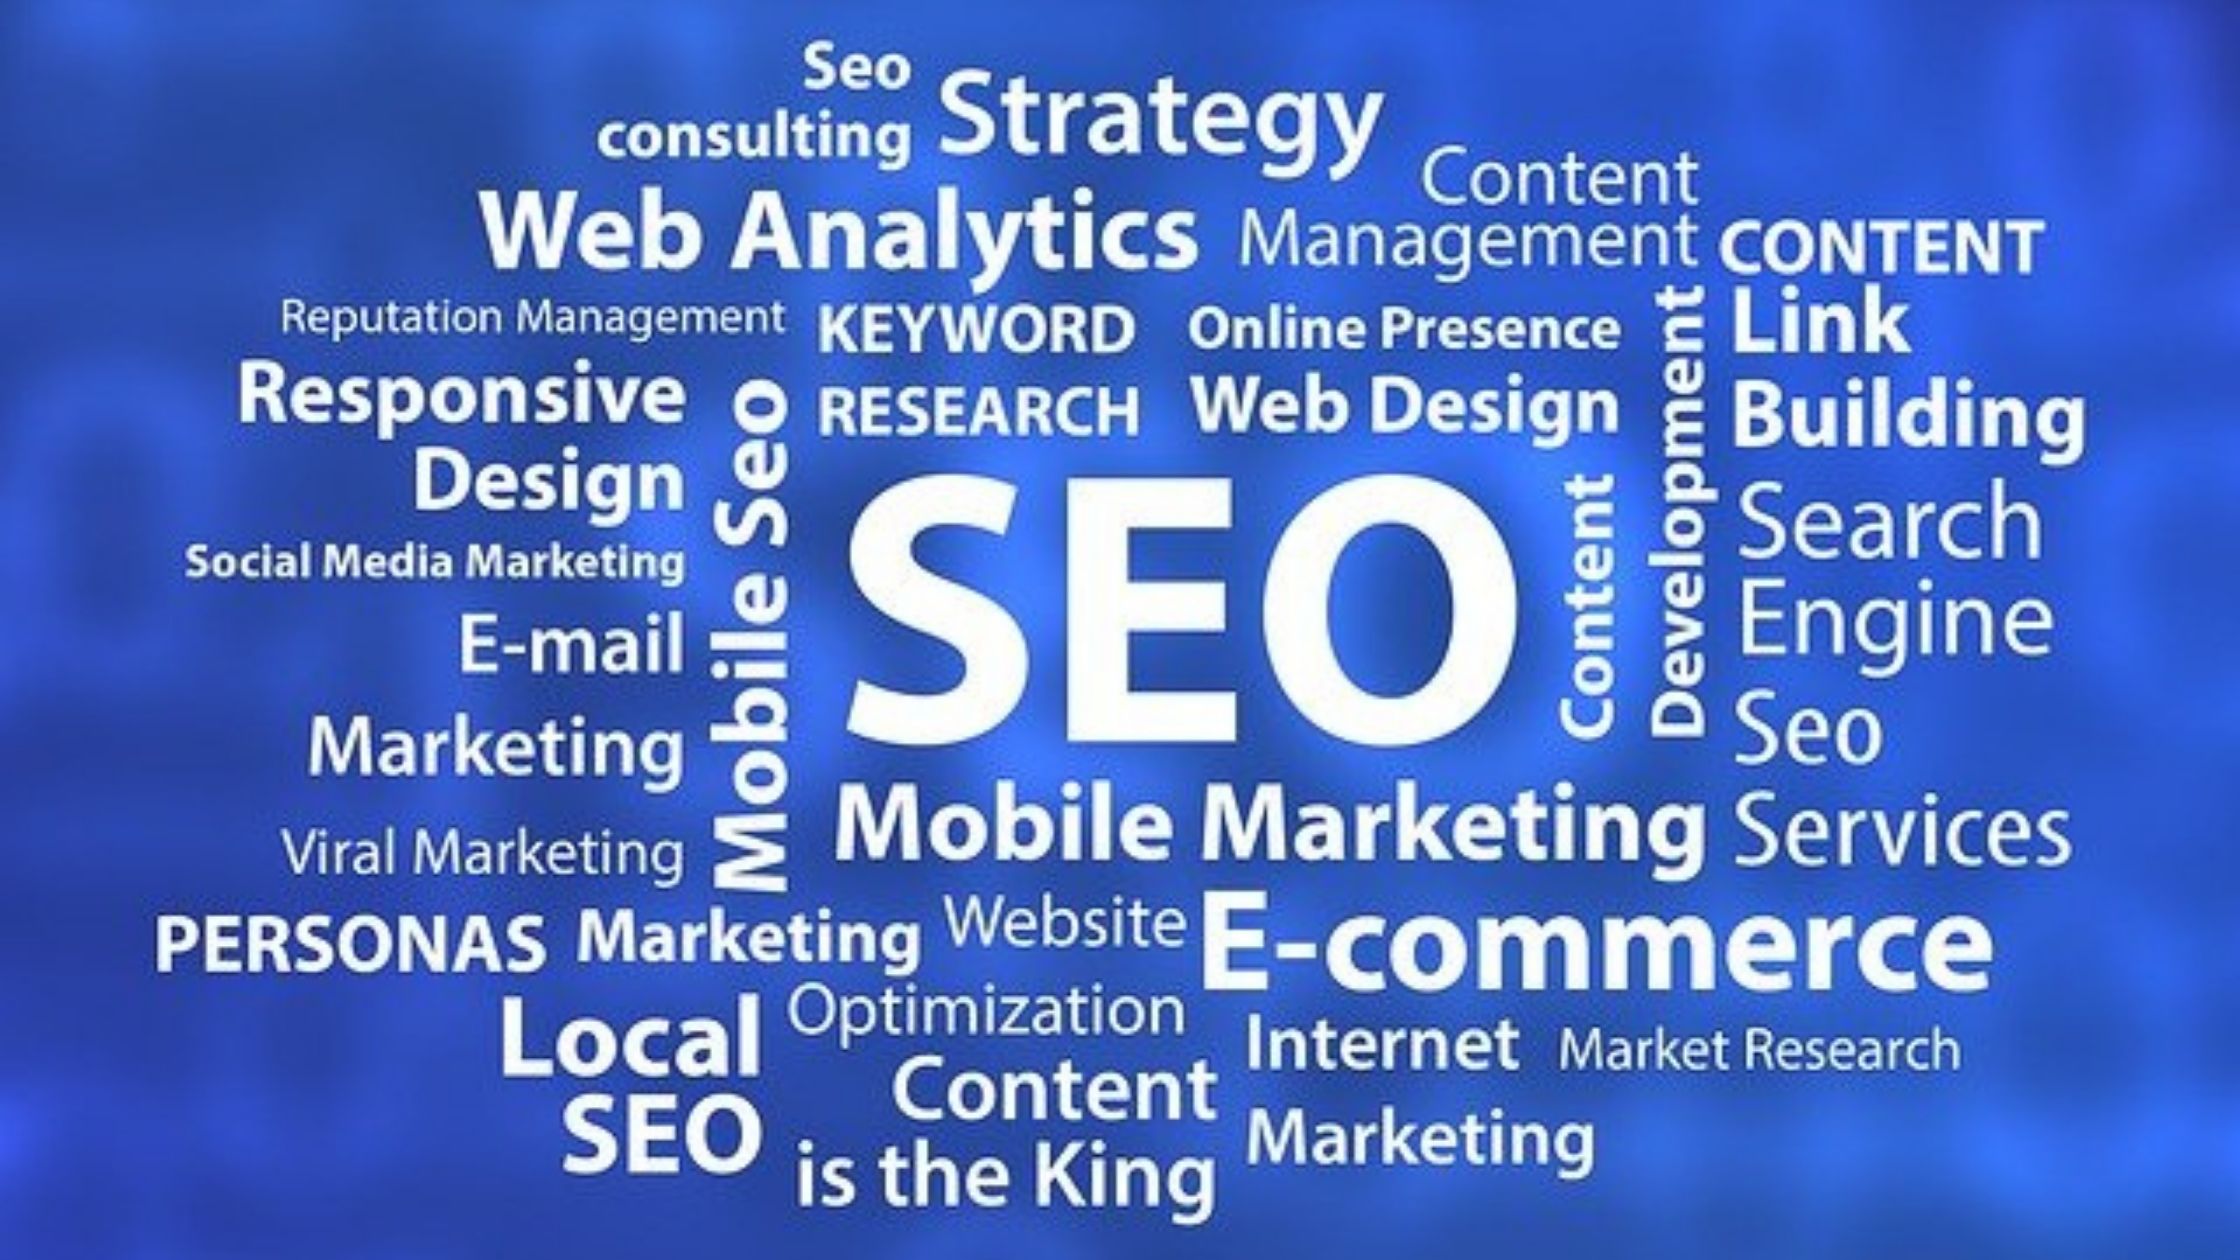 Local SEO: It is the time to conquer the online world